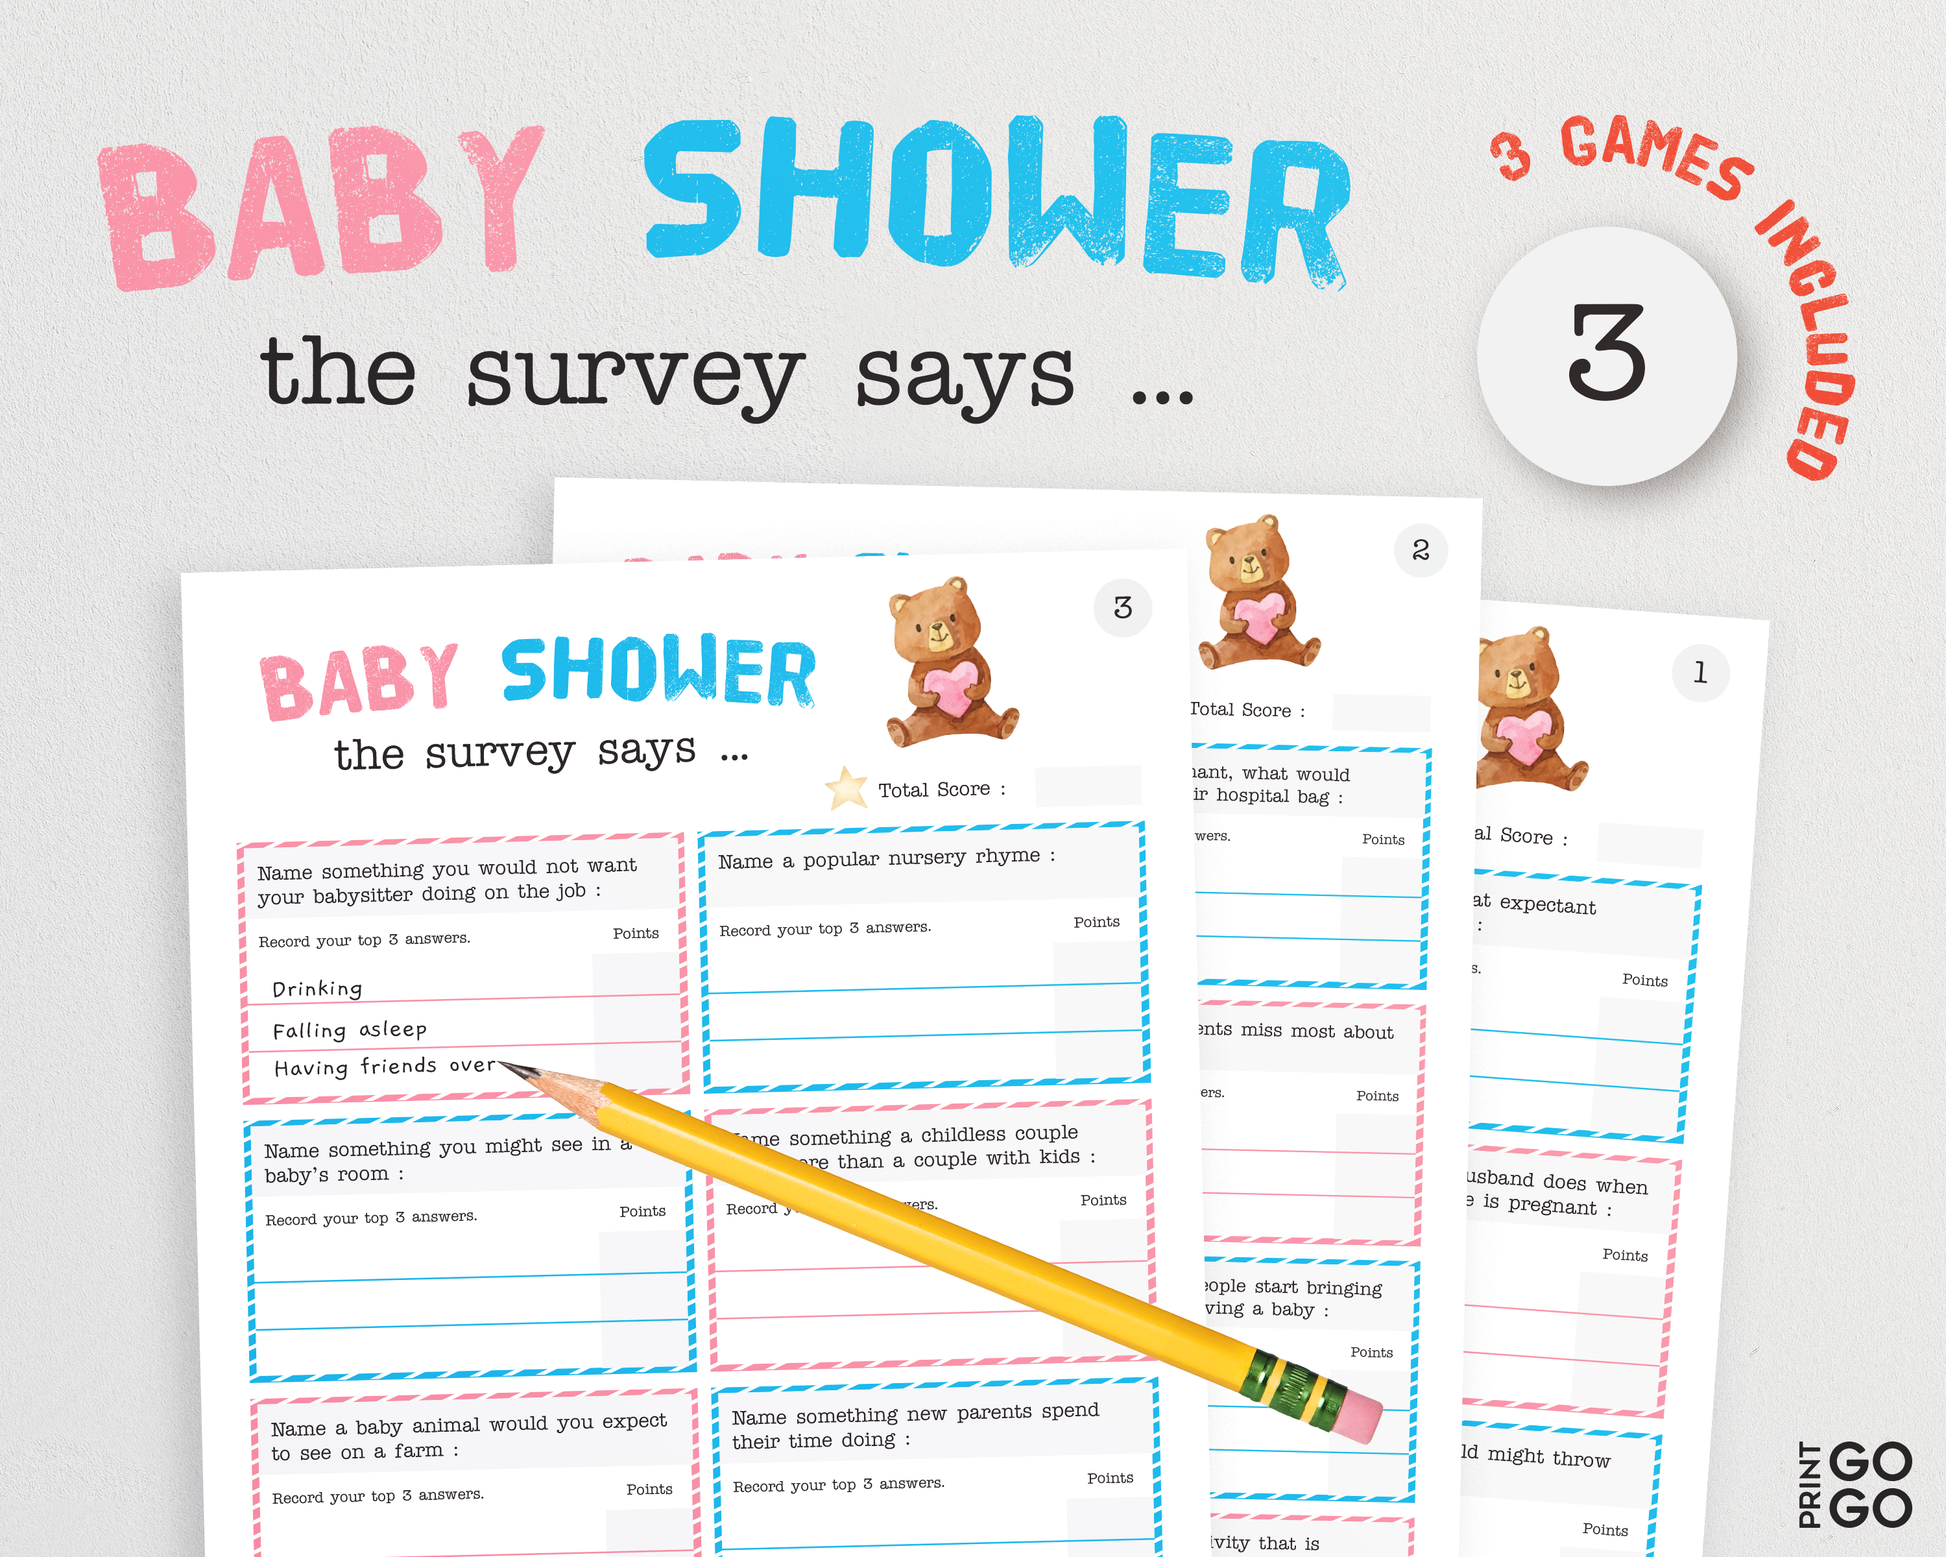 Baby Shower Game Bundle - Fun Party Games for Groups - The Survey Says